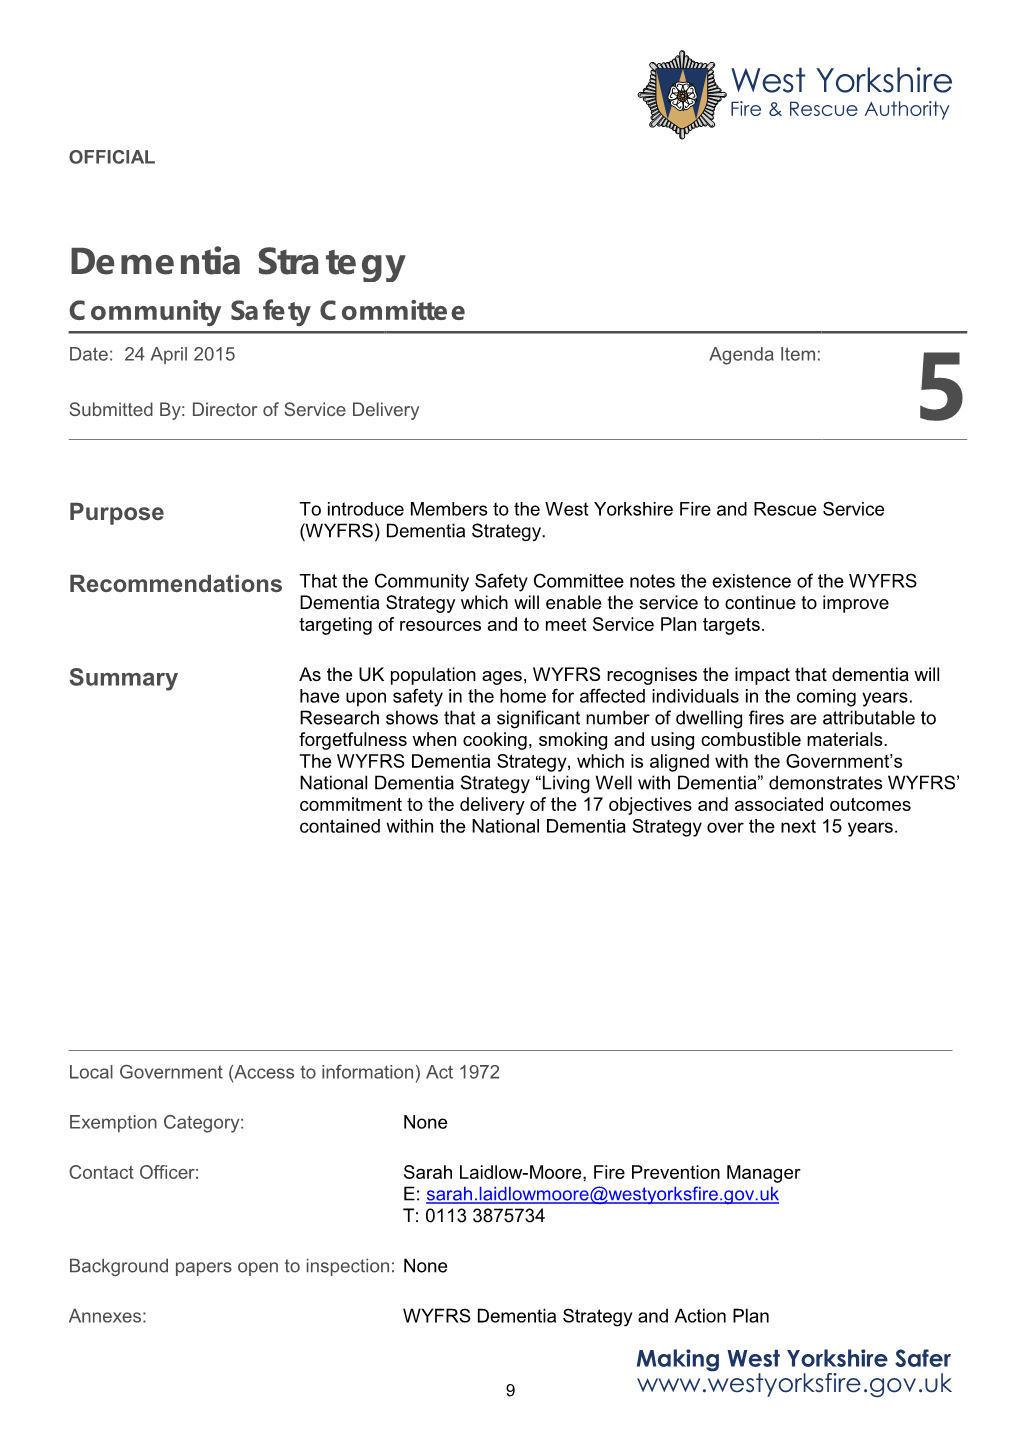 Dementia Strategy Community Safety Committee